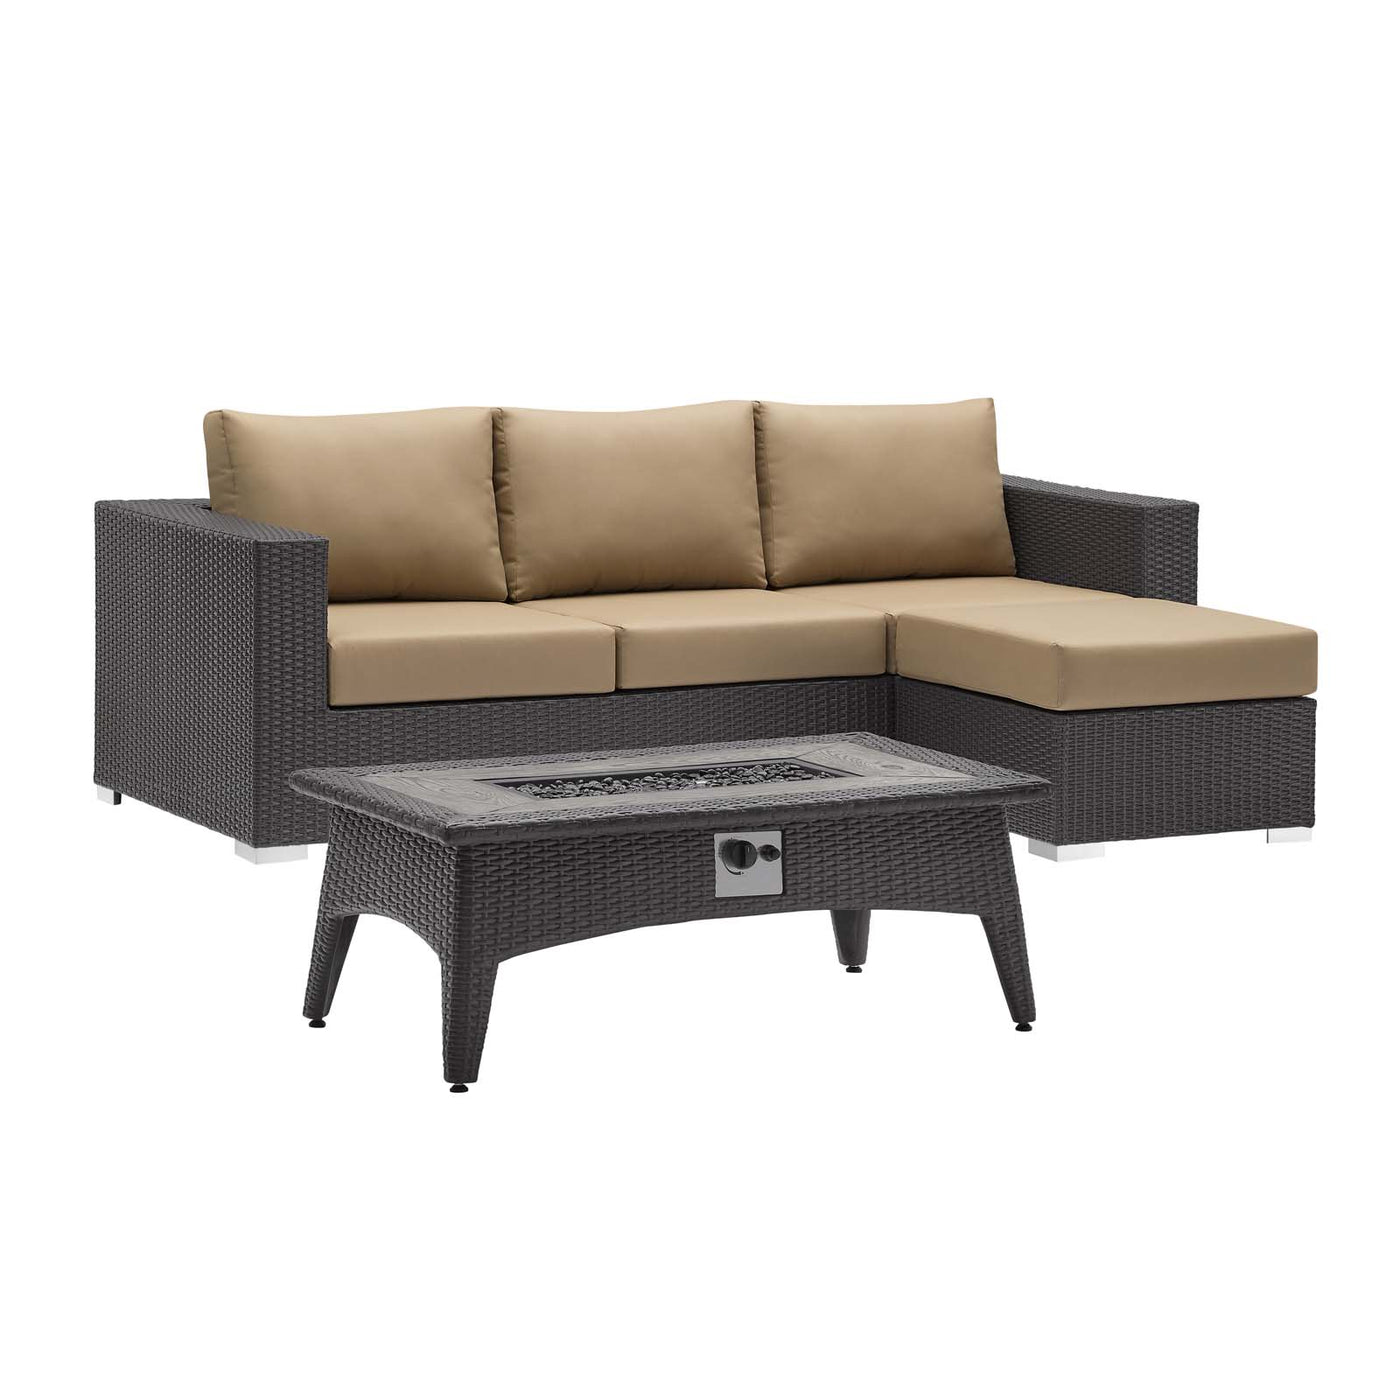 Convene 3 Piece Set Outdoor Patio with Fire Pit